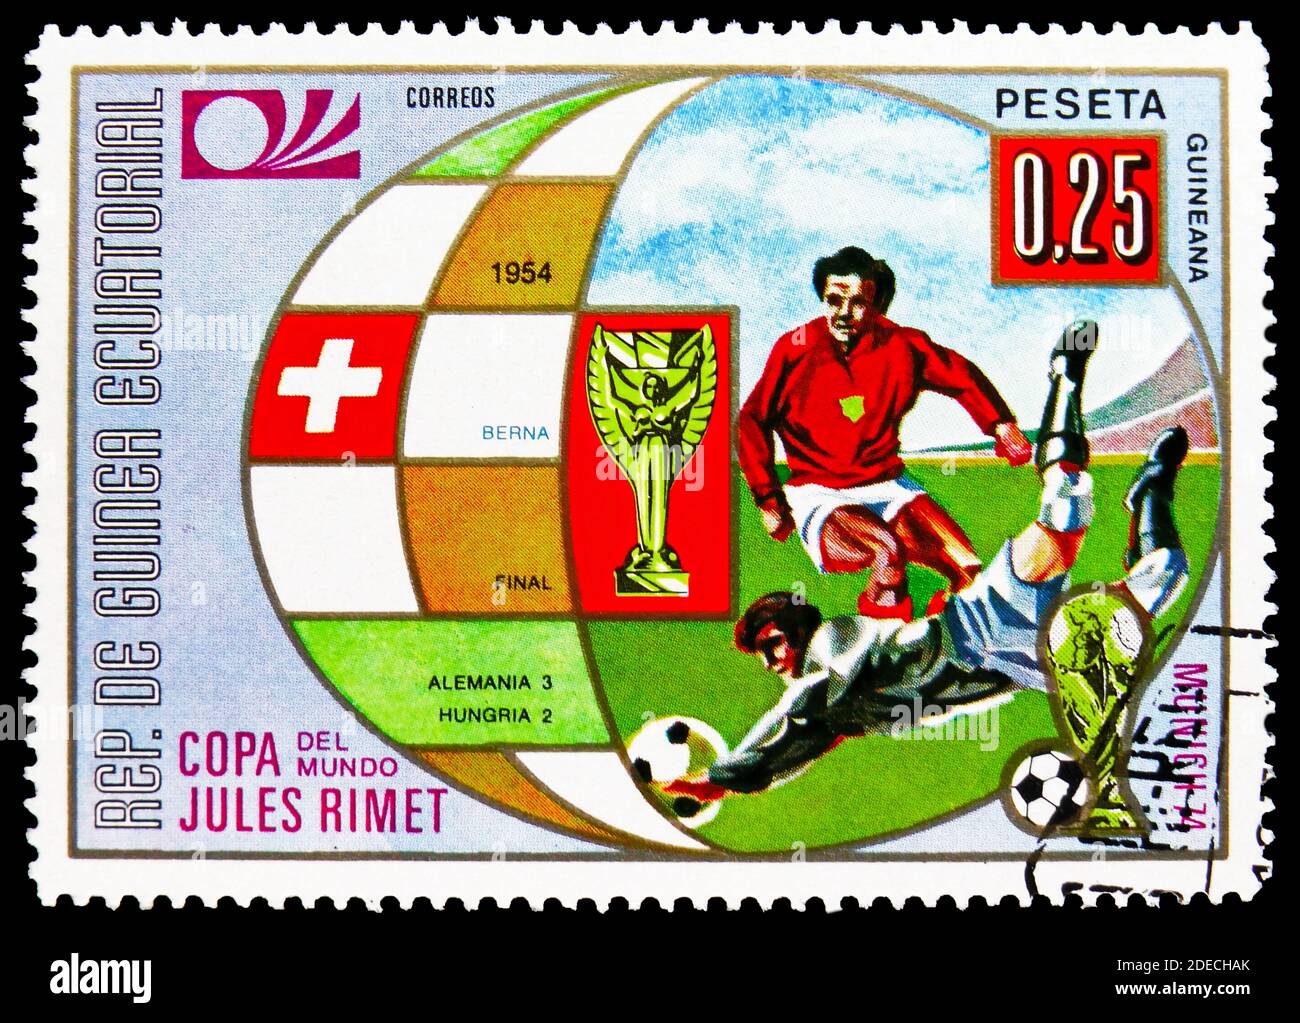 MOSCOW, RUSSIA - OCTOBER 17, 2020: Postage stamp printed in Equatorial Guinea shows Bern, Football World Cup 1974, Germany: Earlier World Cup finals s Stock Photo